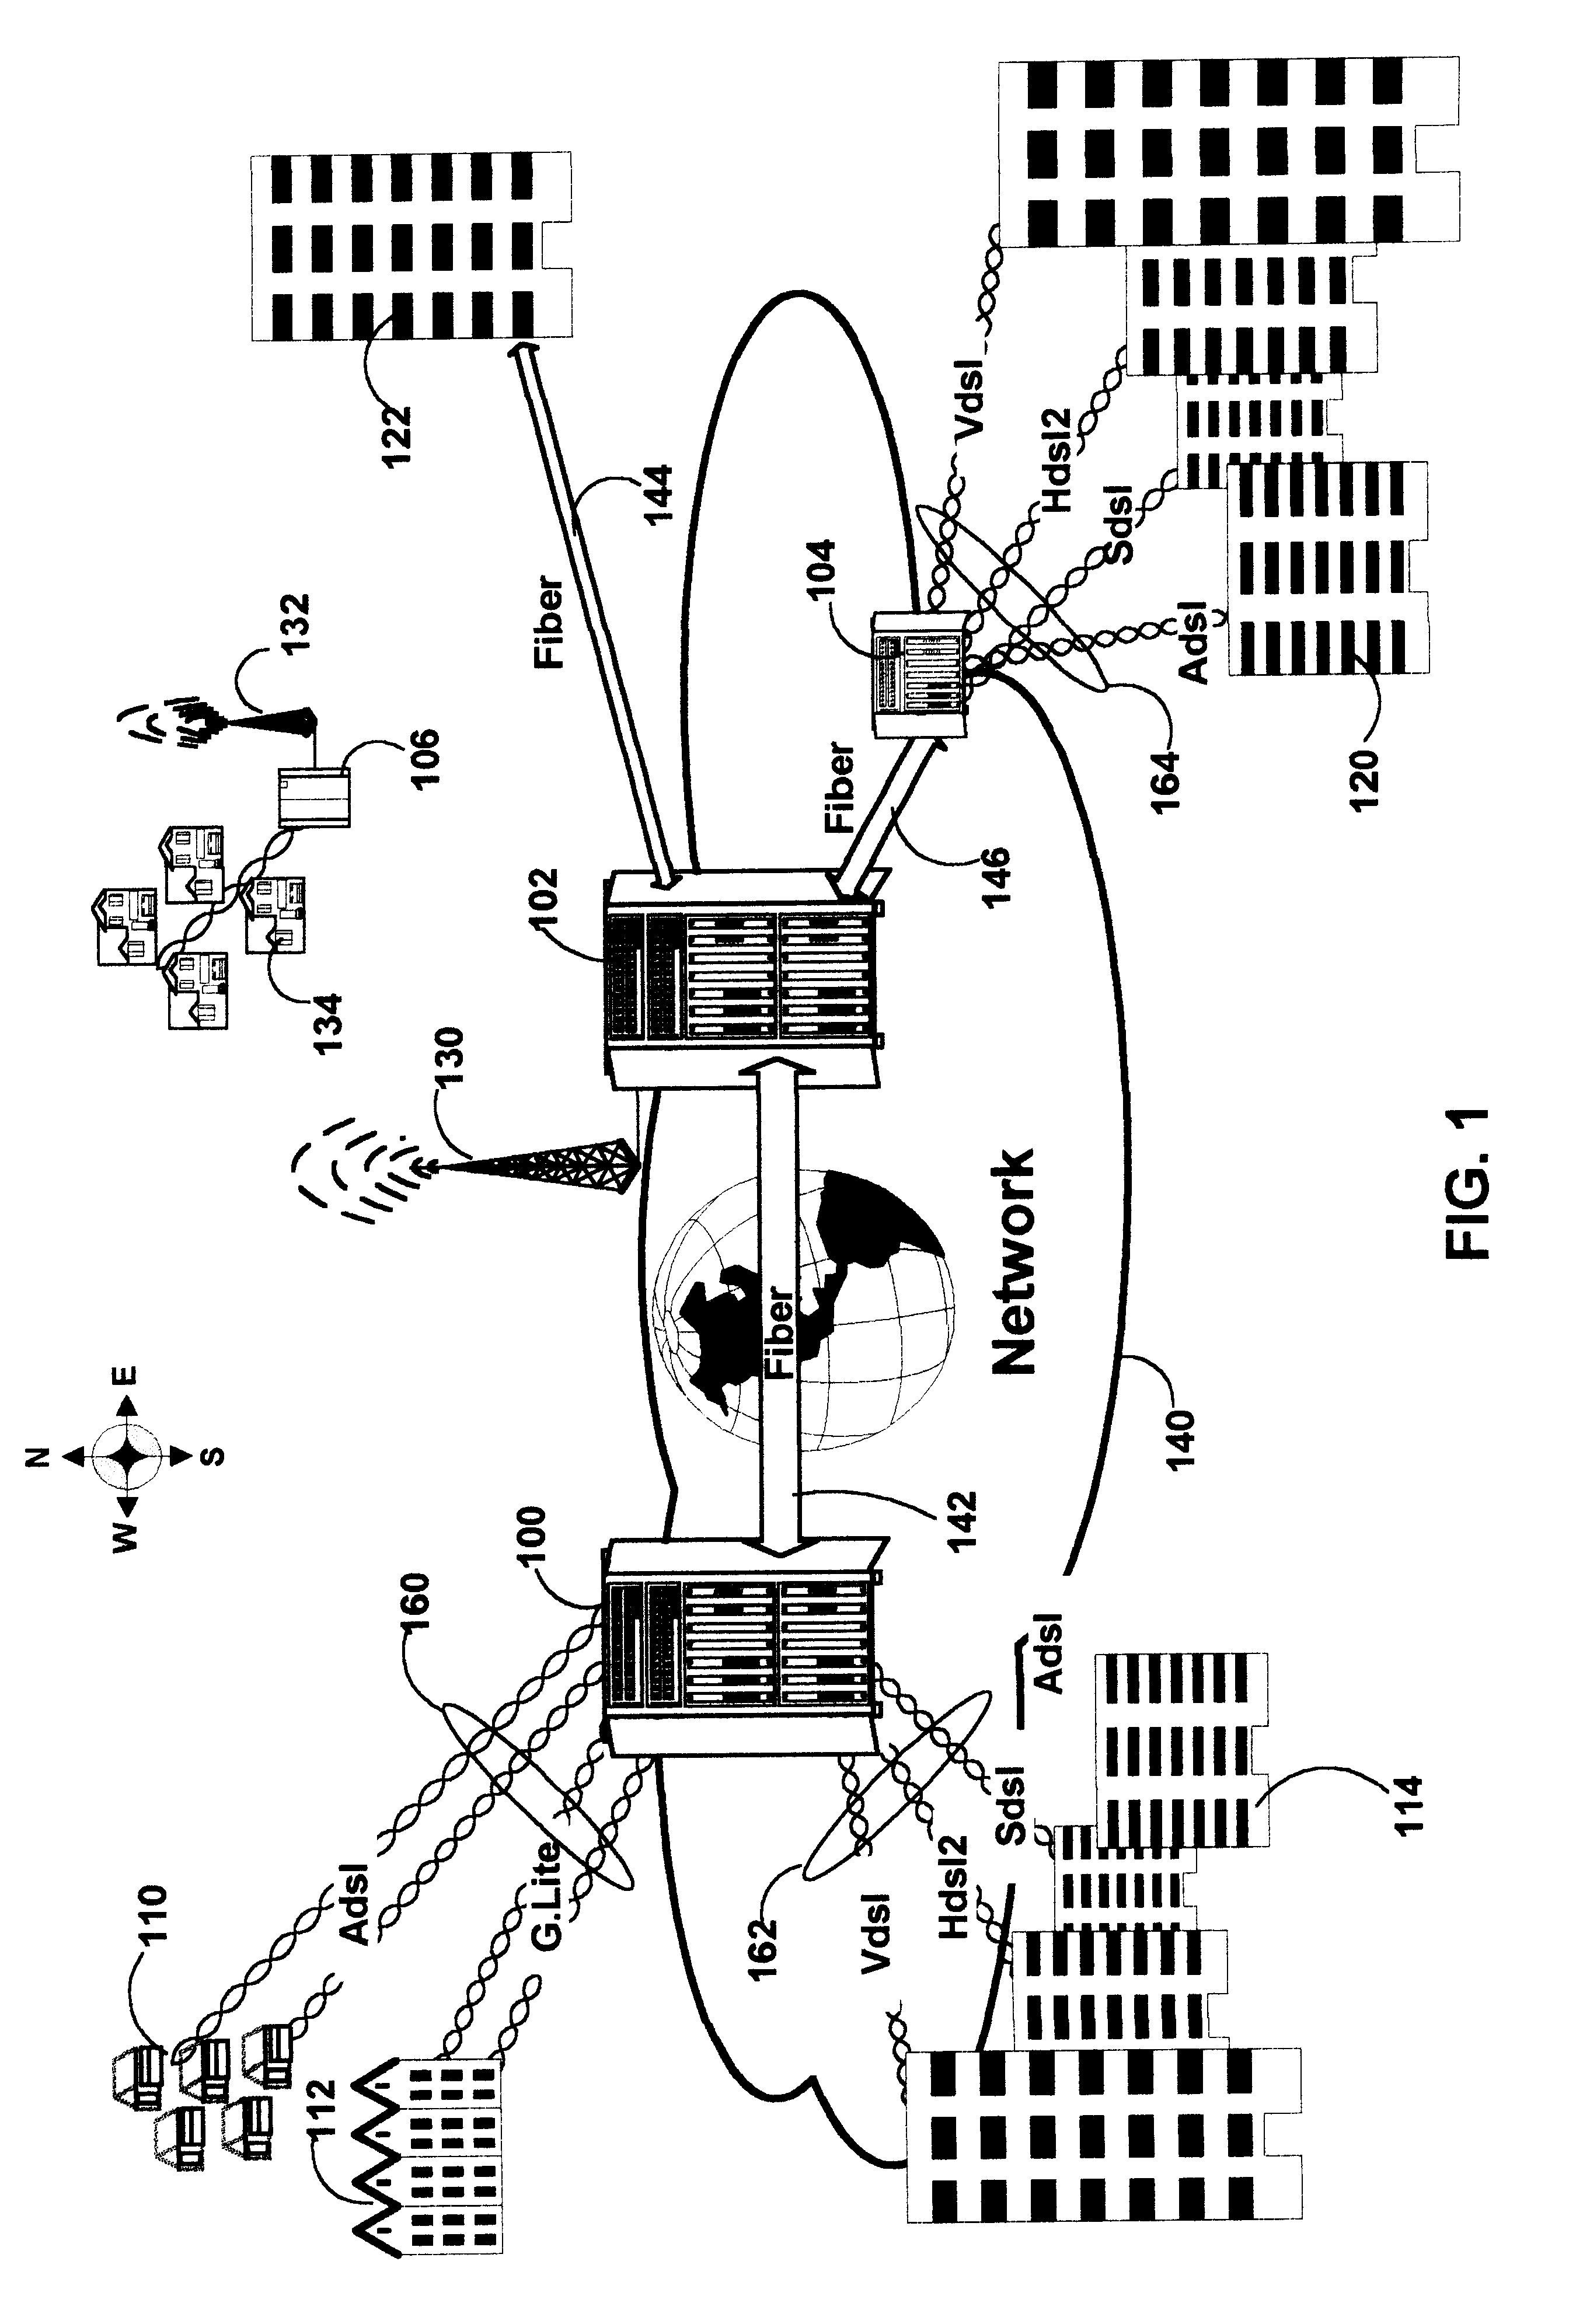 Method and apparatus for synchronizing a packet based modem supporting multiple X-DSL protocols